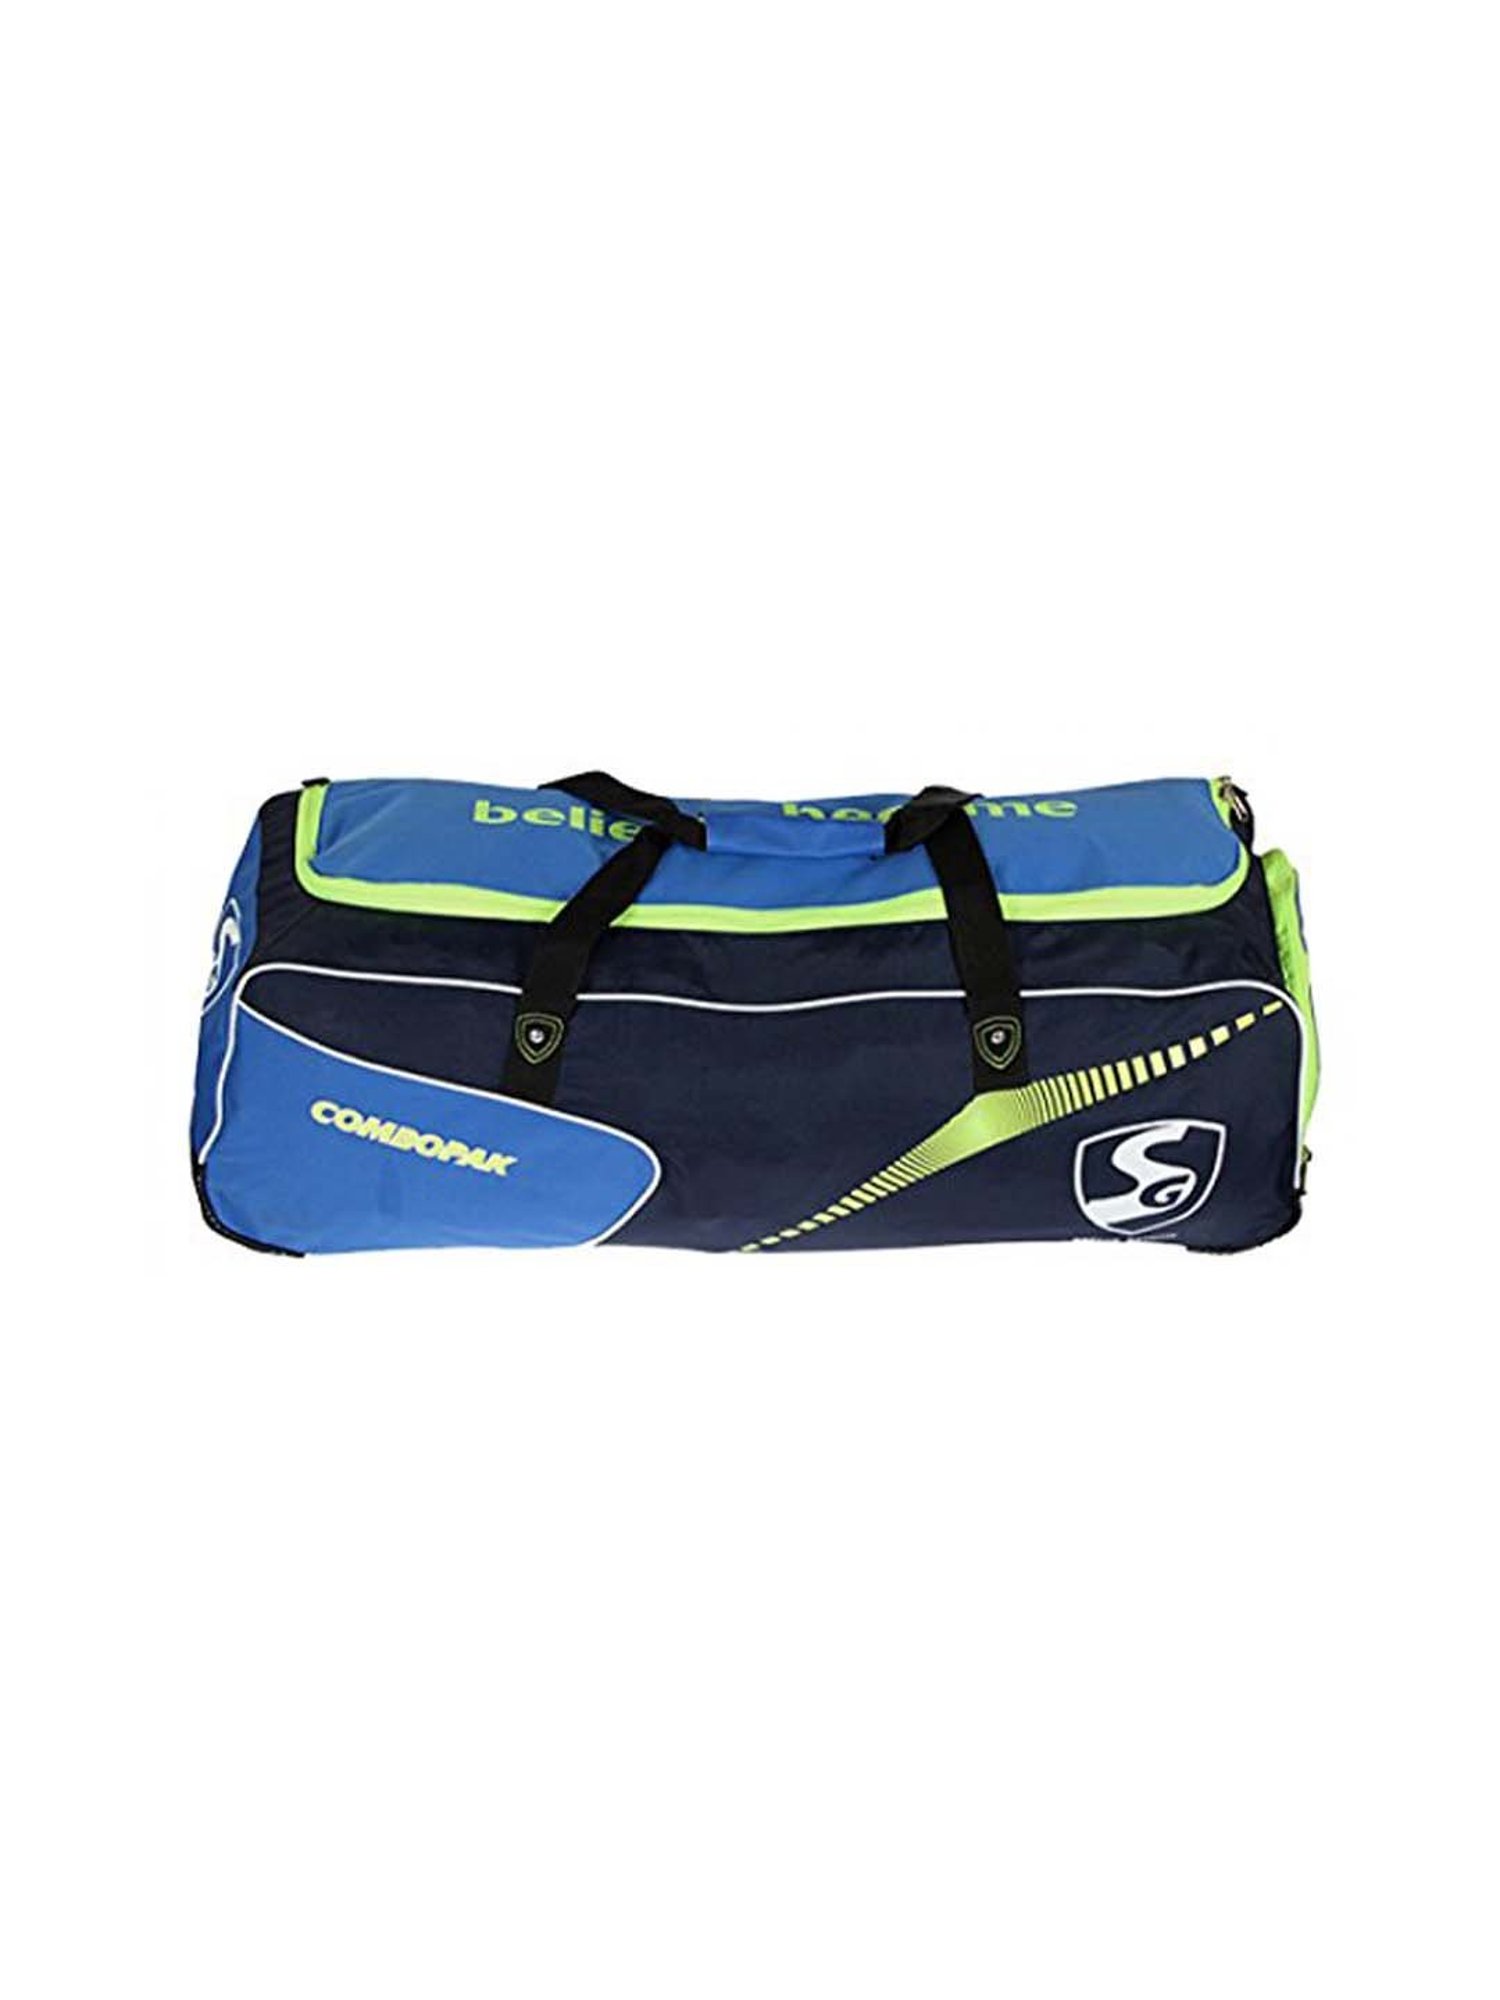 SG Teampak (Blue) Wheel Cricket Kit Bag - The Cricket Square - Leading  Online Store for Cricket Bats and Accessories